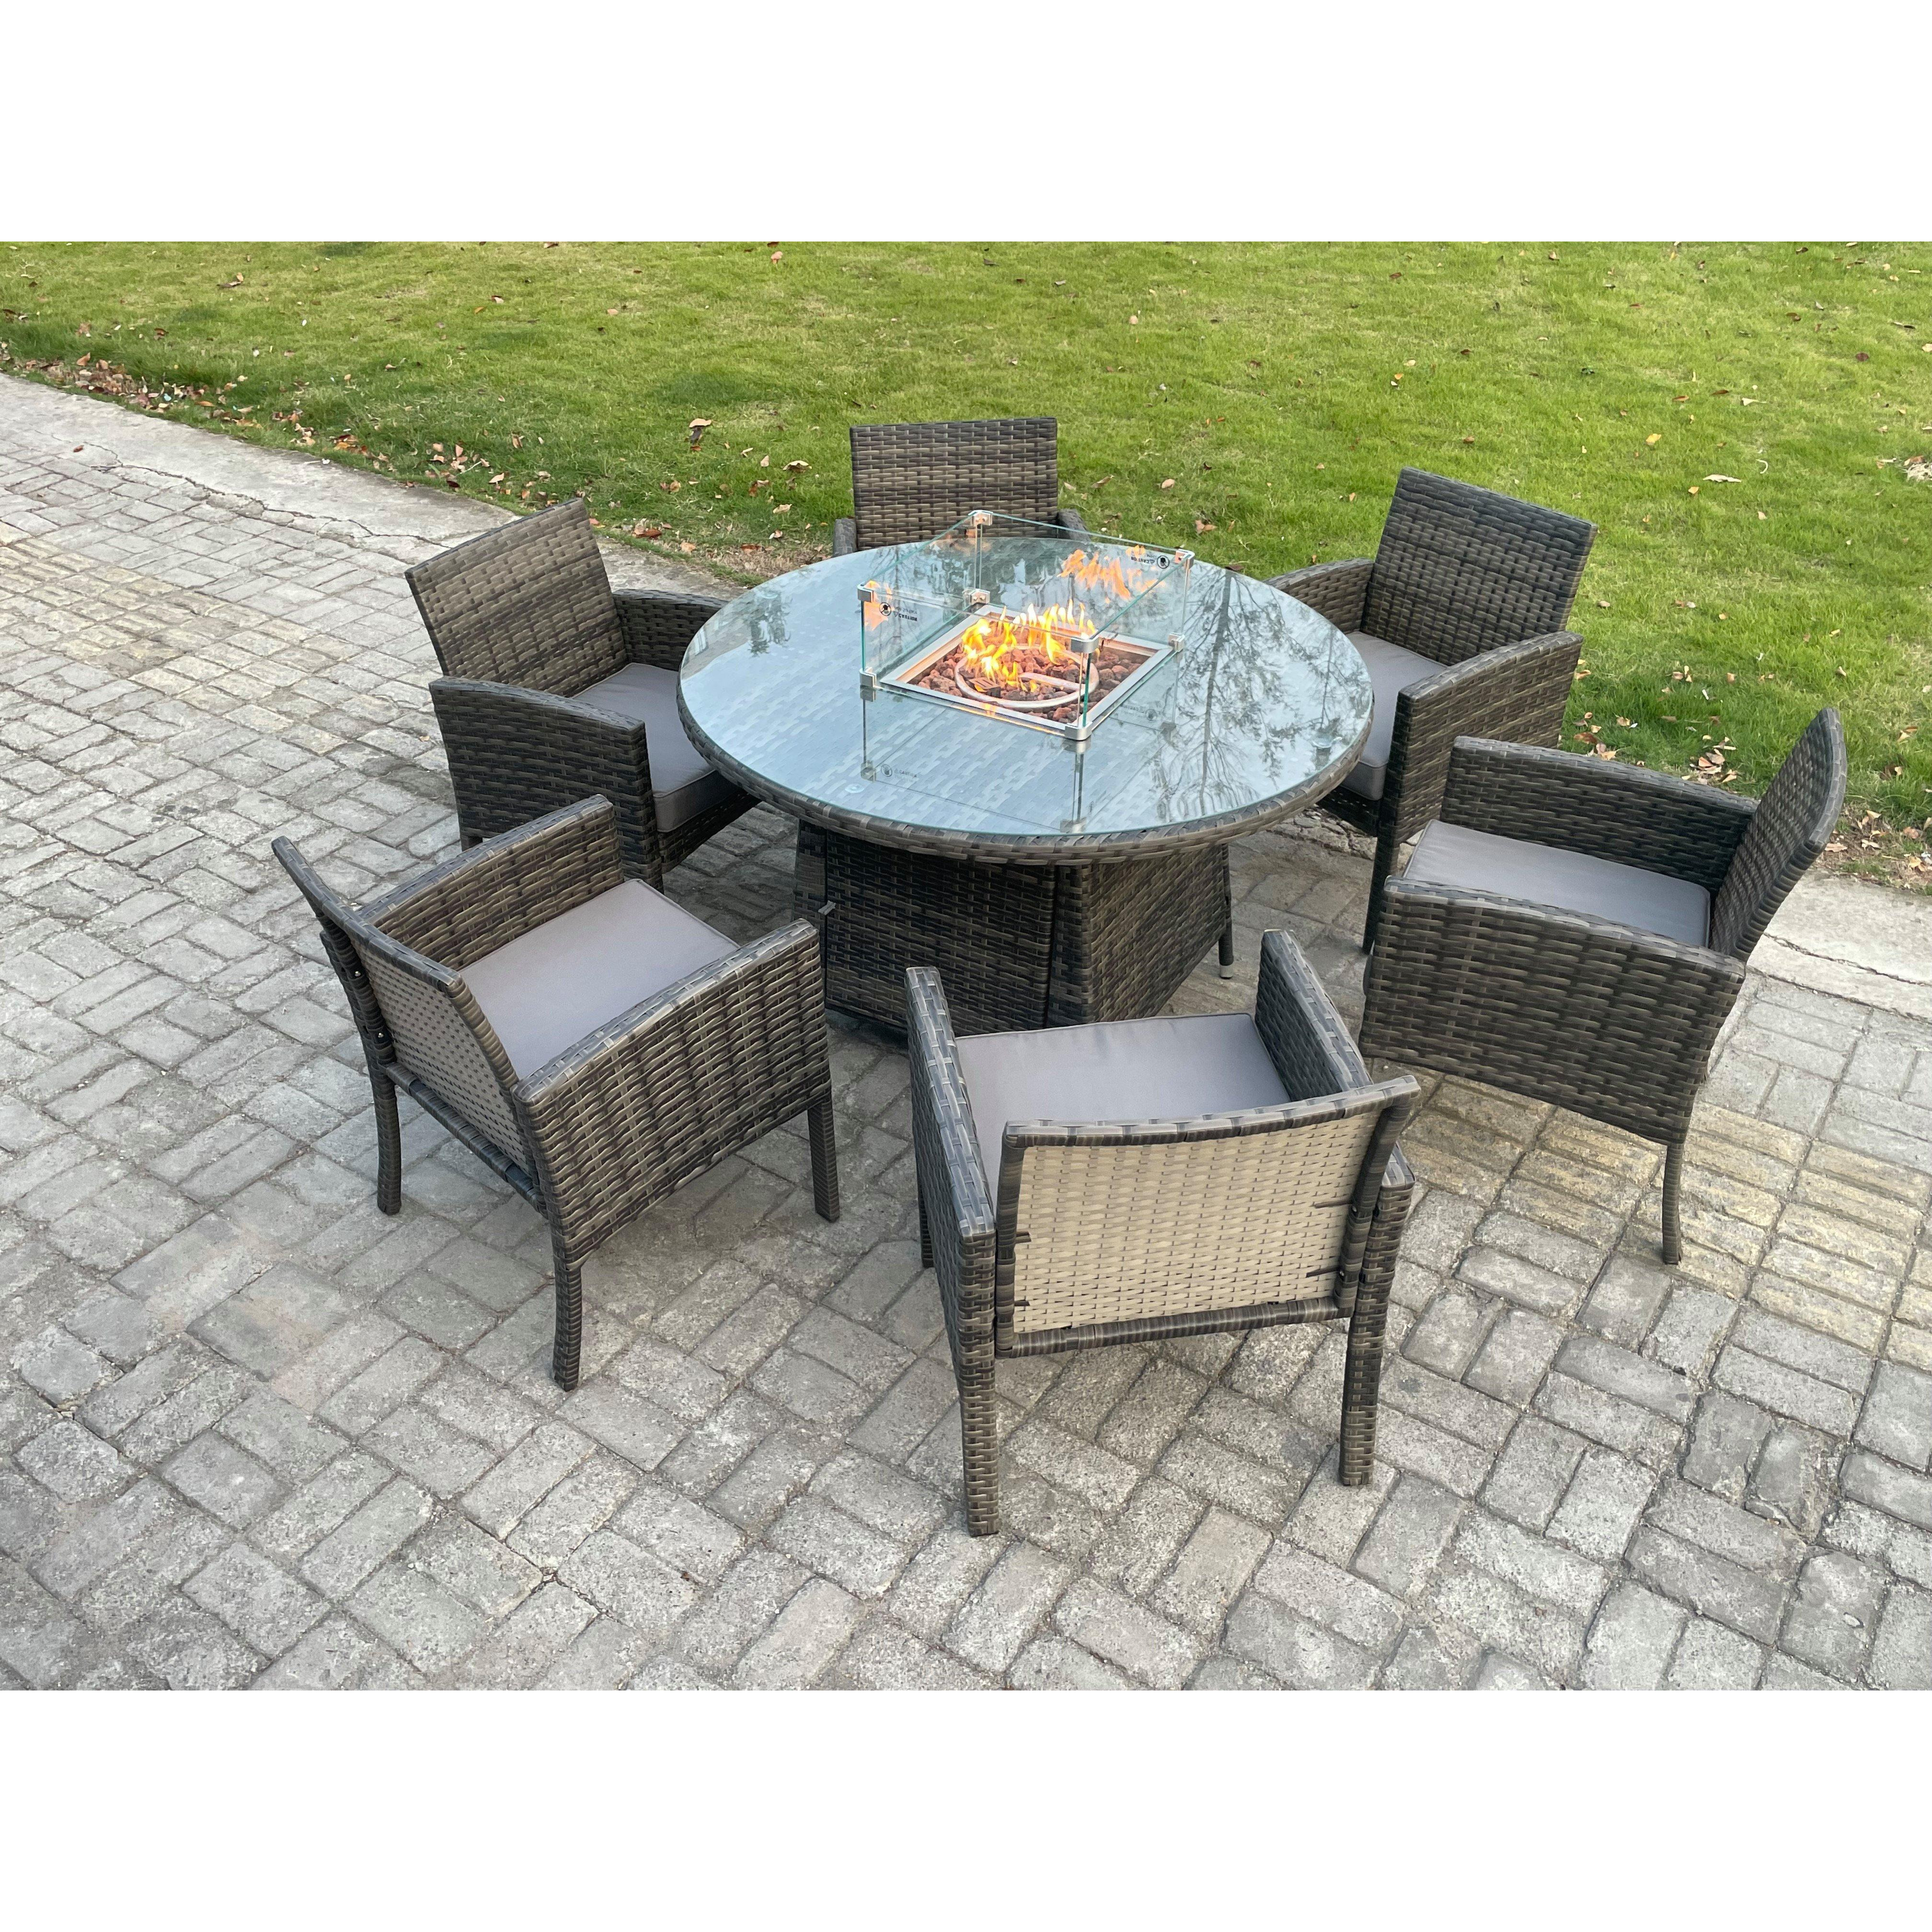 Outdoor Rattan Garden Furniture Set Gas Fire Pit Round Table Sets Gas Heater with 6 Seater Dining Chairs Dark Grey Mixed - image 1